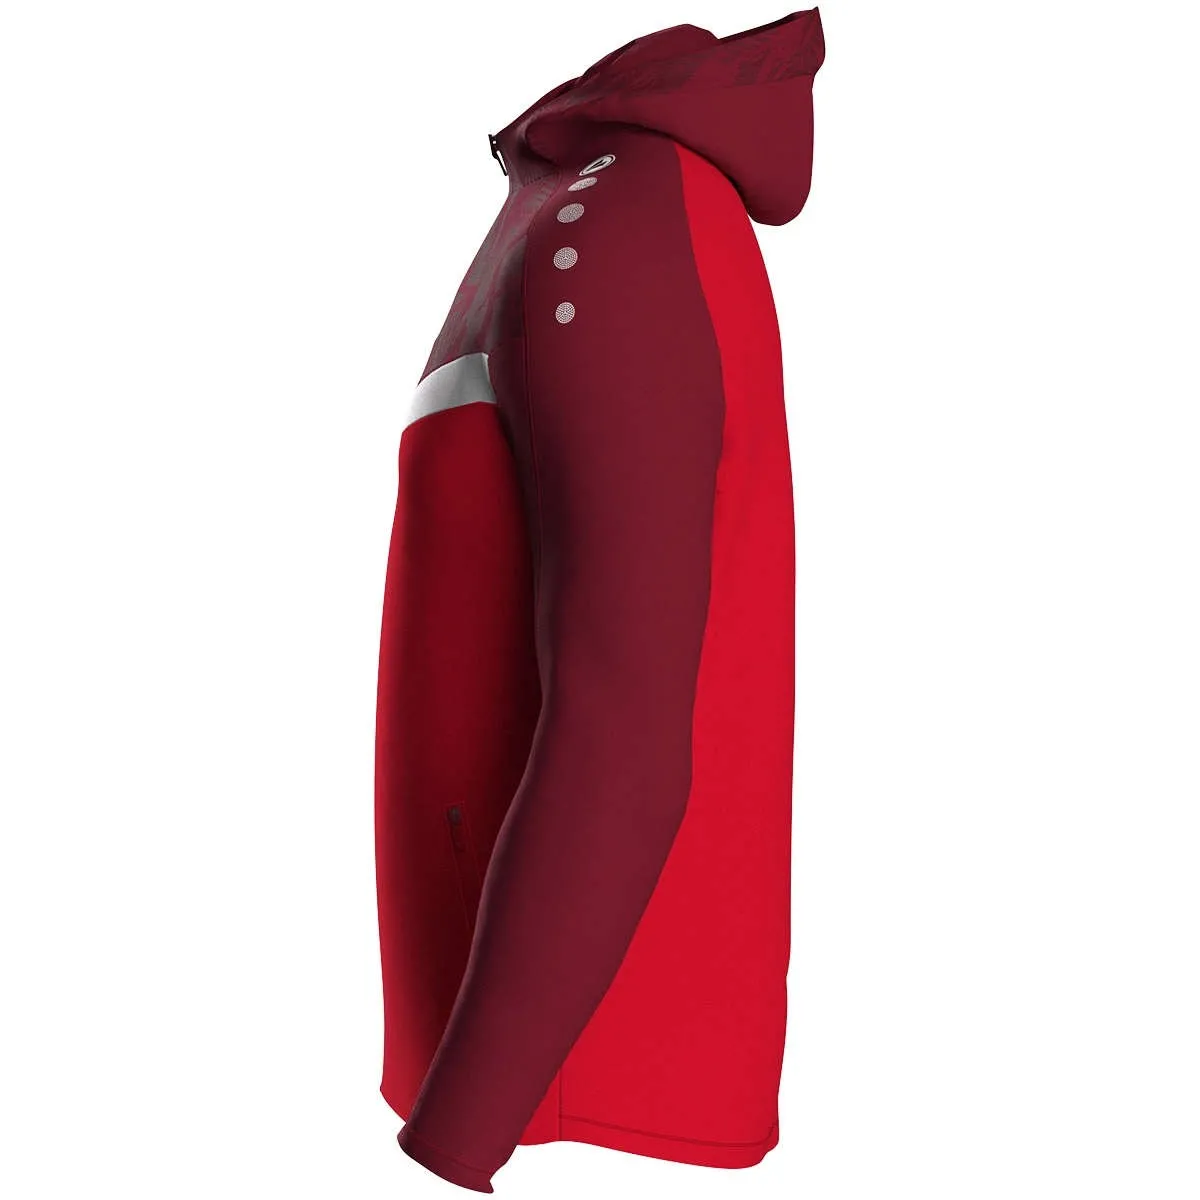 JAKO hooded jacket Iconic red/wine red